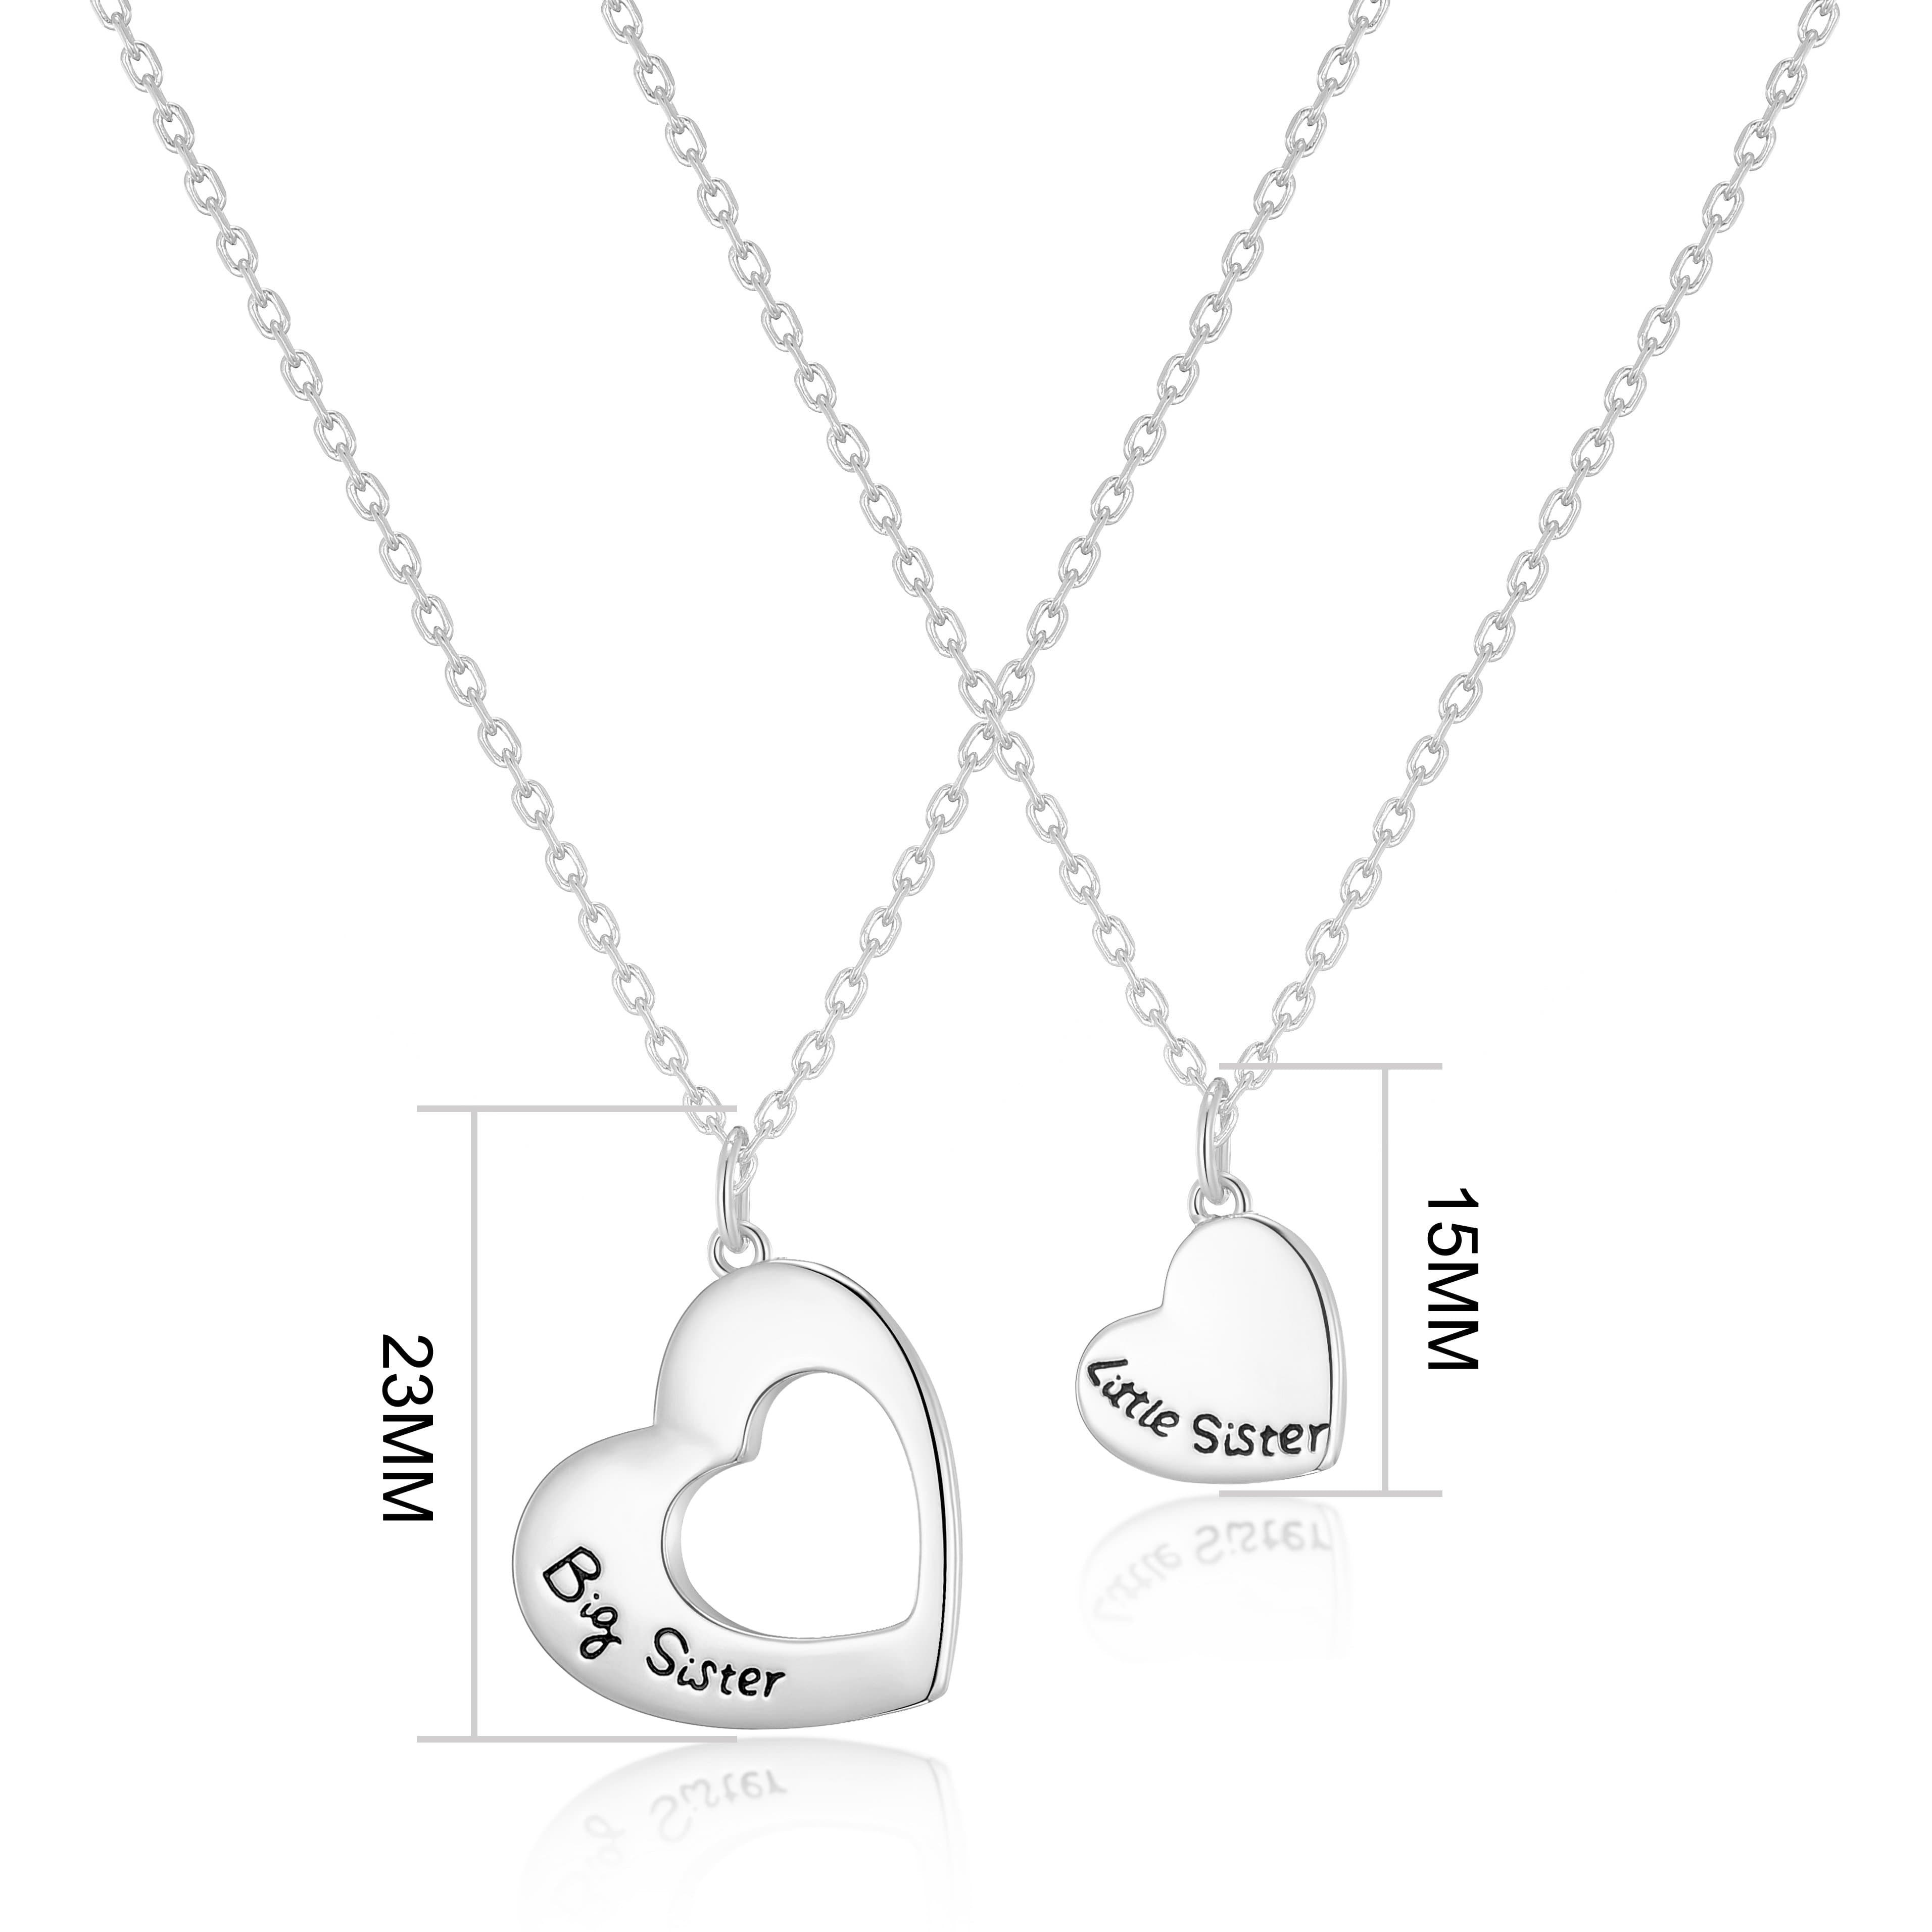 Silver Plated Big Sister and Little Sister Necklace Set